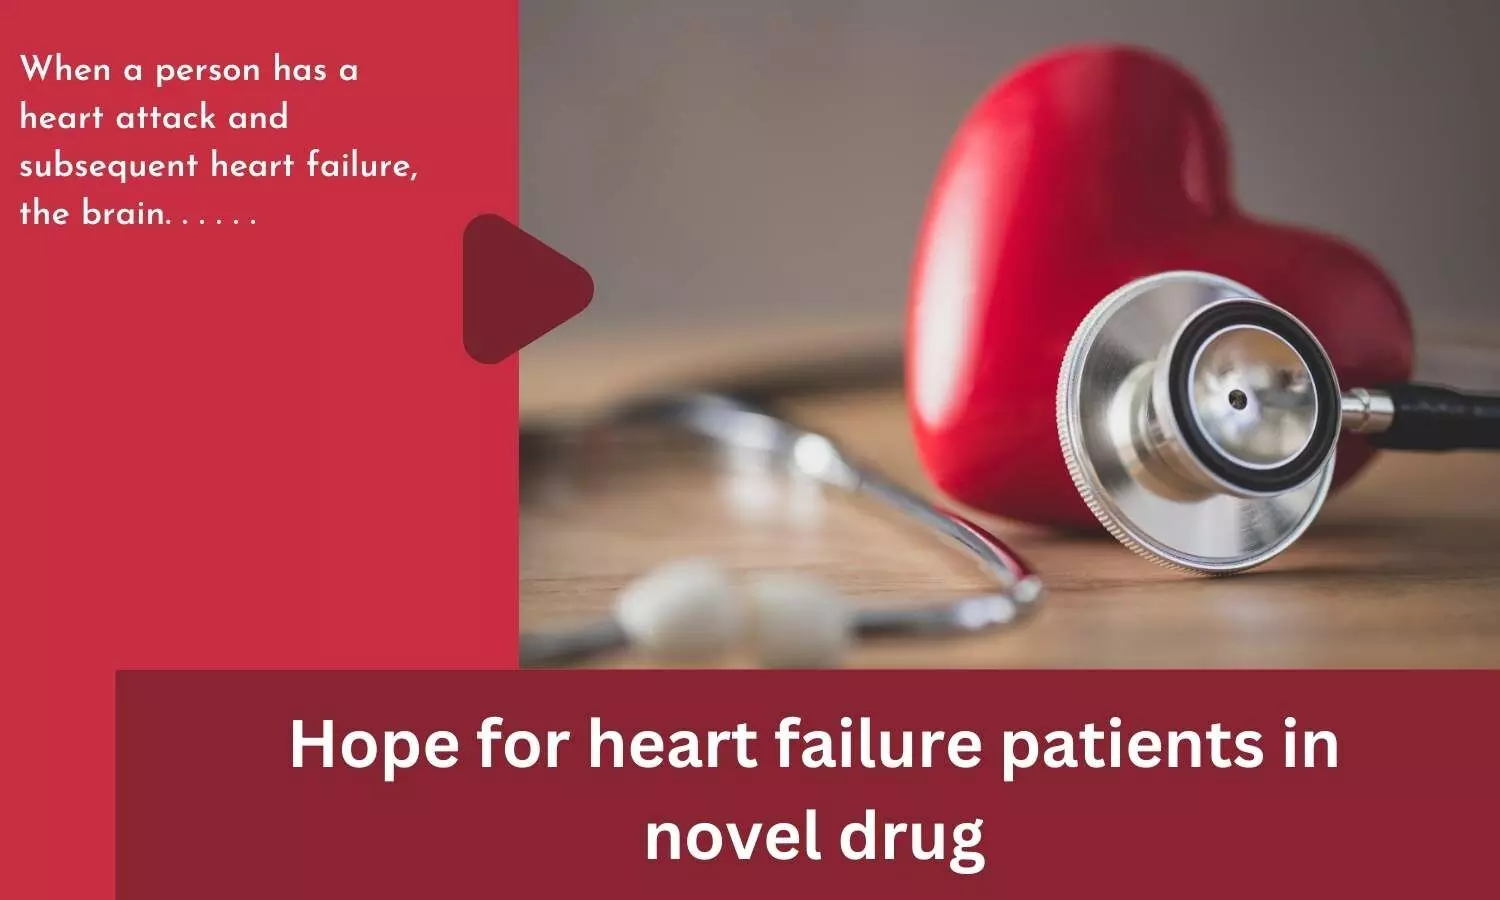 Hope for heart failure patients in novel drug